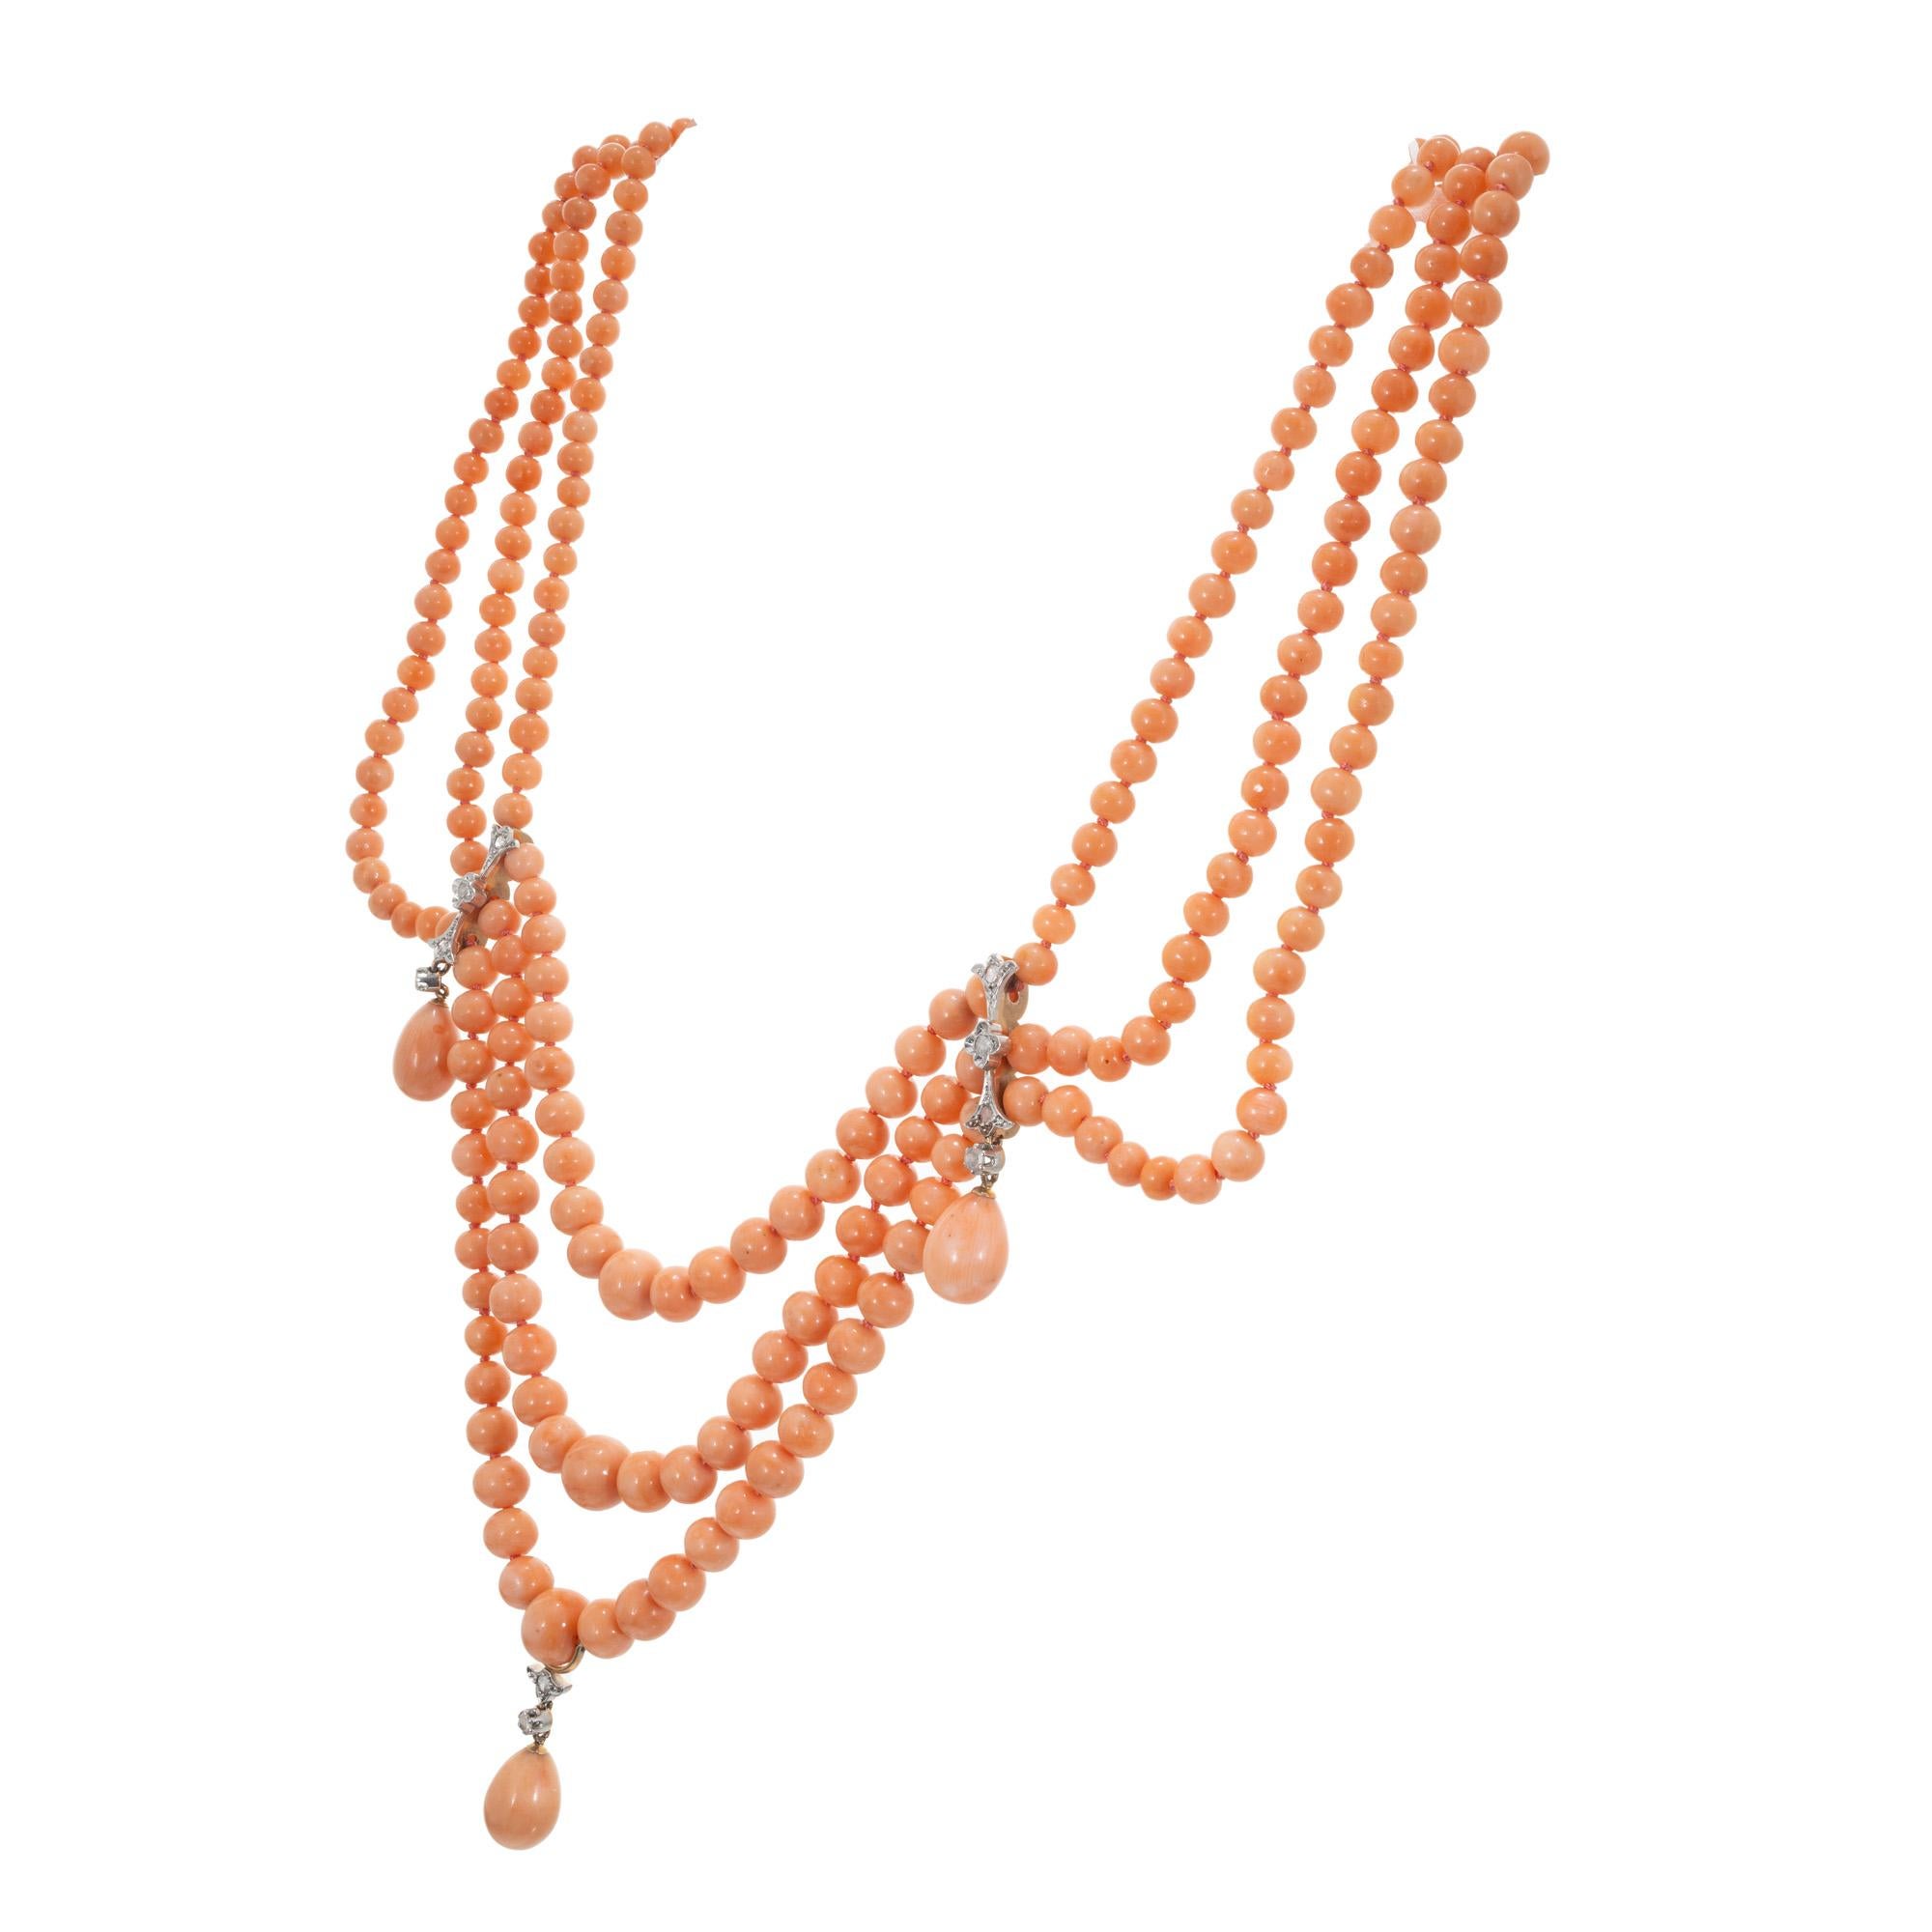 Lat 1800's Victorian Three Strand coral bead necklace. This necklace showcases the radiant beauty of coral, which is known for its alluring hues and unique texture. The three strands of coral of well matched beads strung together. The vibrant coral